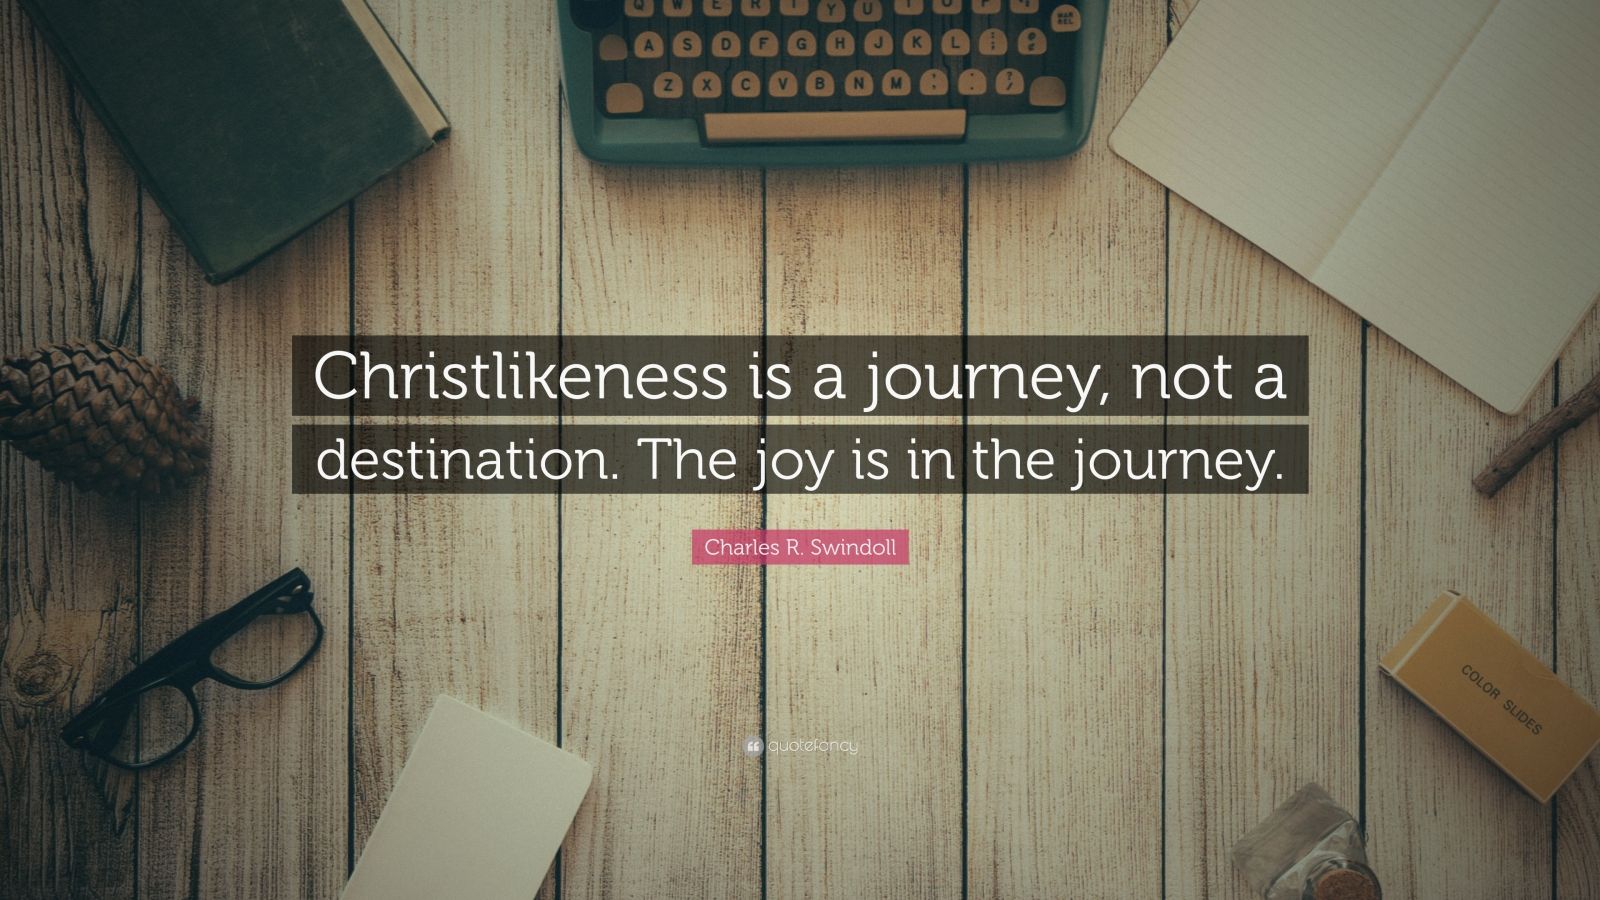 Charles R Swindoll Quote “christlikeness Is A Journey Not A Destination The Joy Is In The